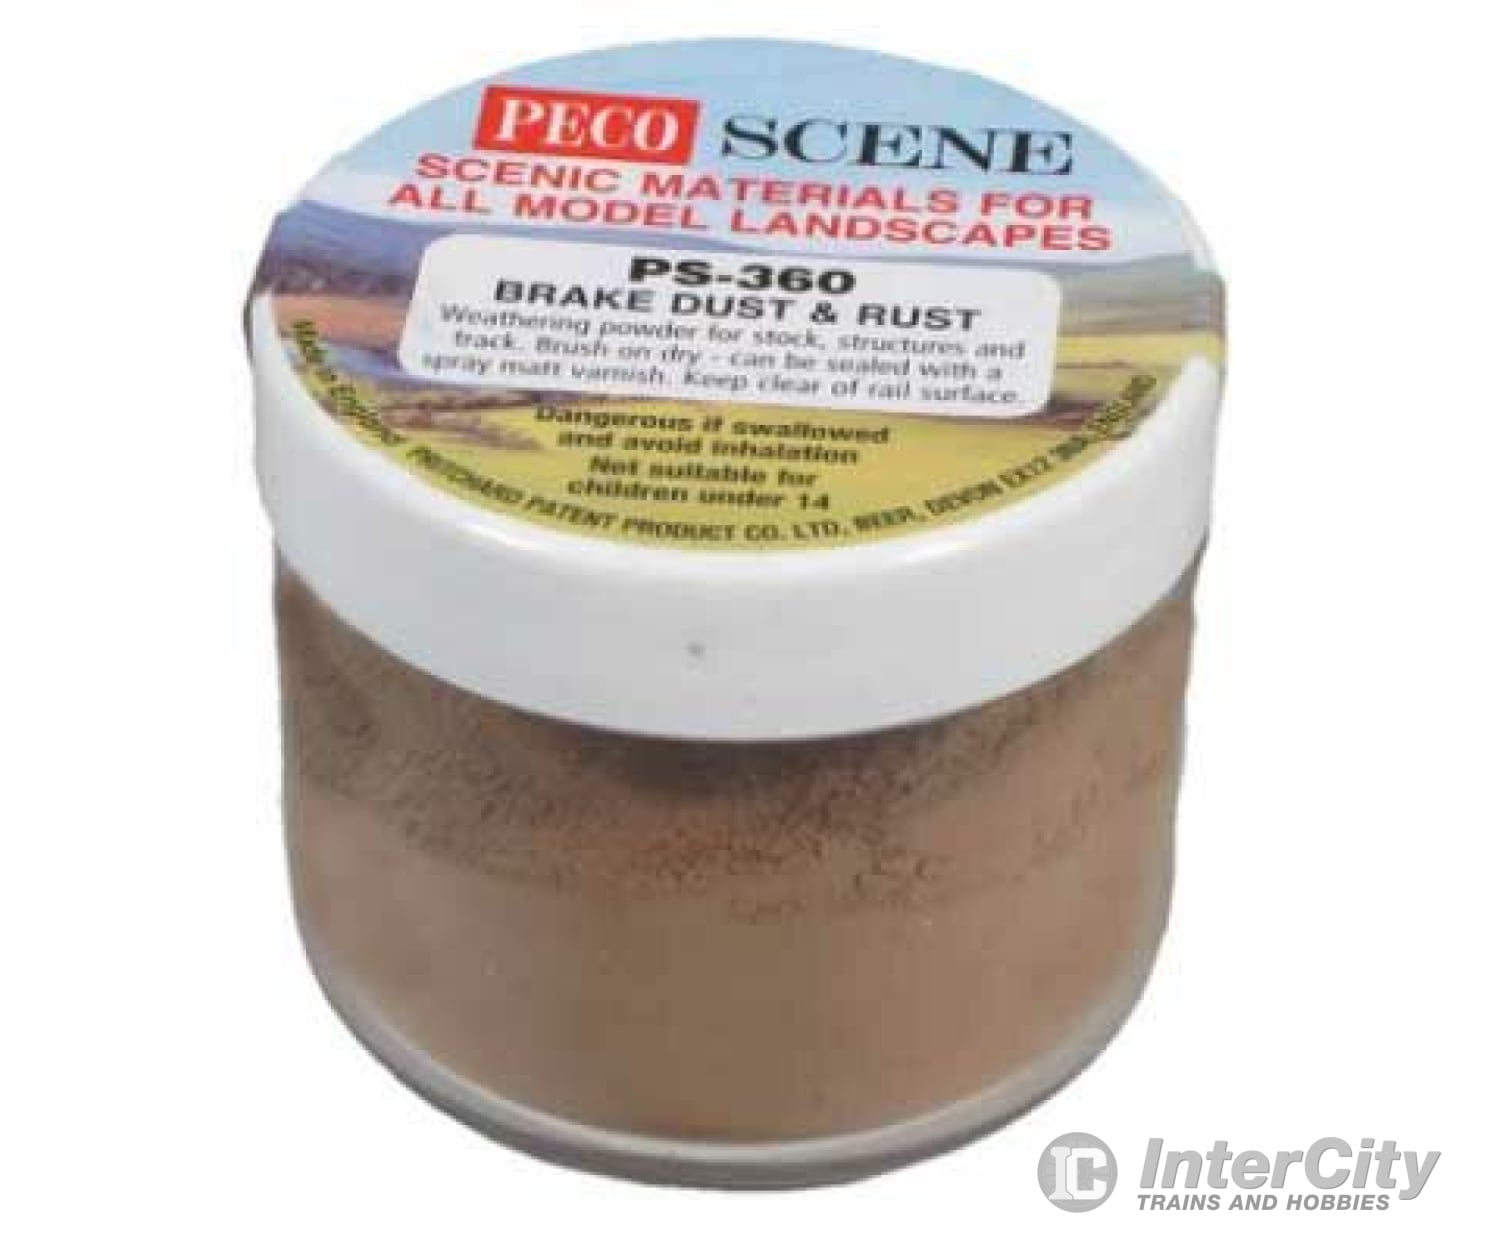 Peco Ps360 Brake Dust And Rust Weathering Powder